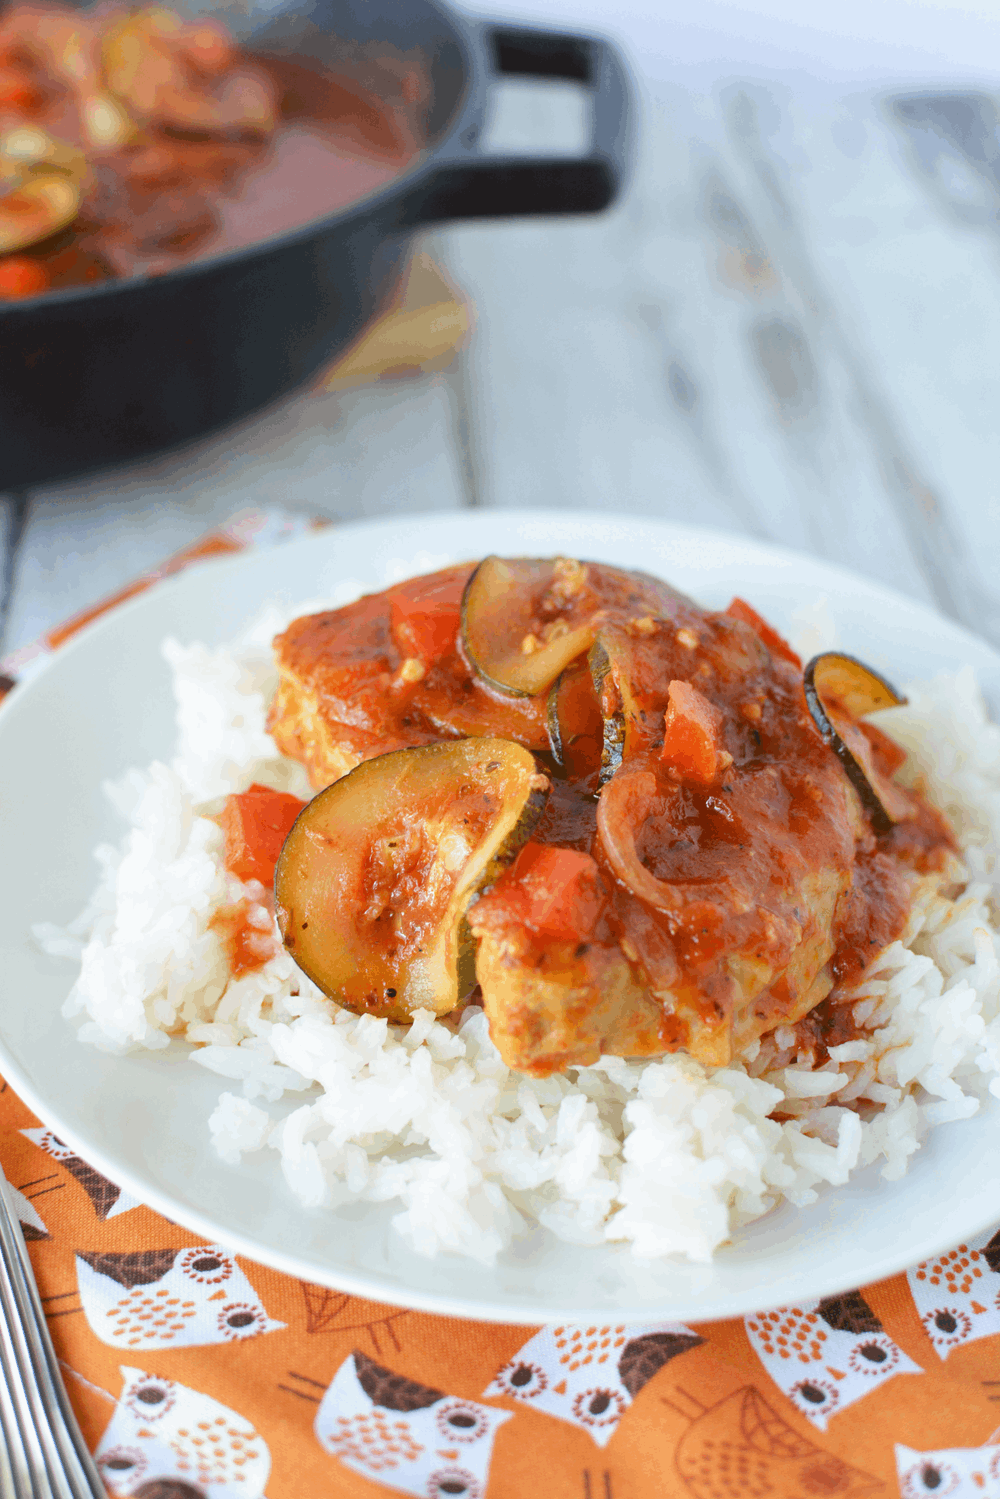 Chops with tomato sauce over a bed of white rice